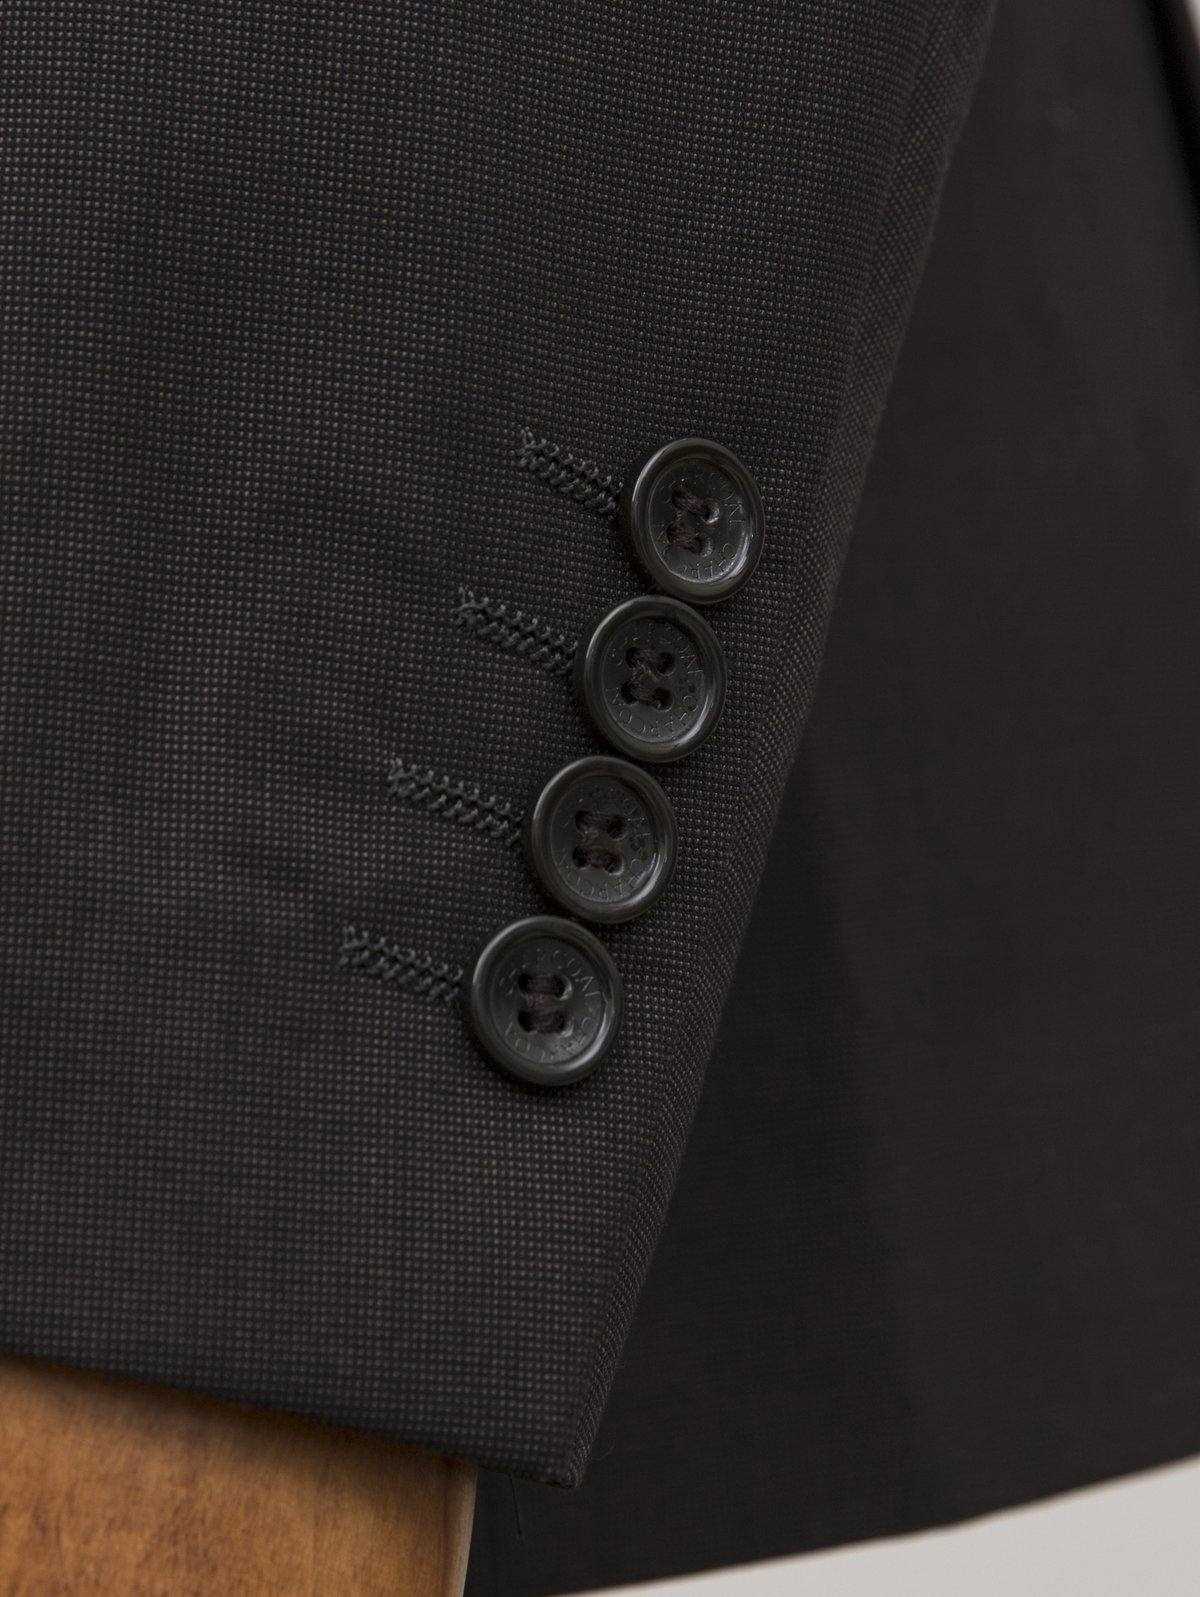 2 PIECE SUIT BLACK BROWN Charcoal Clothing